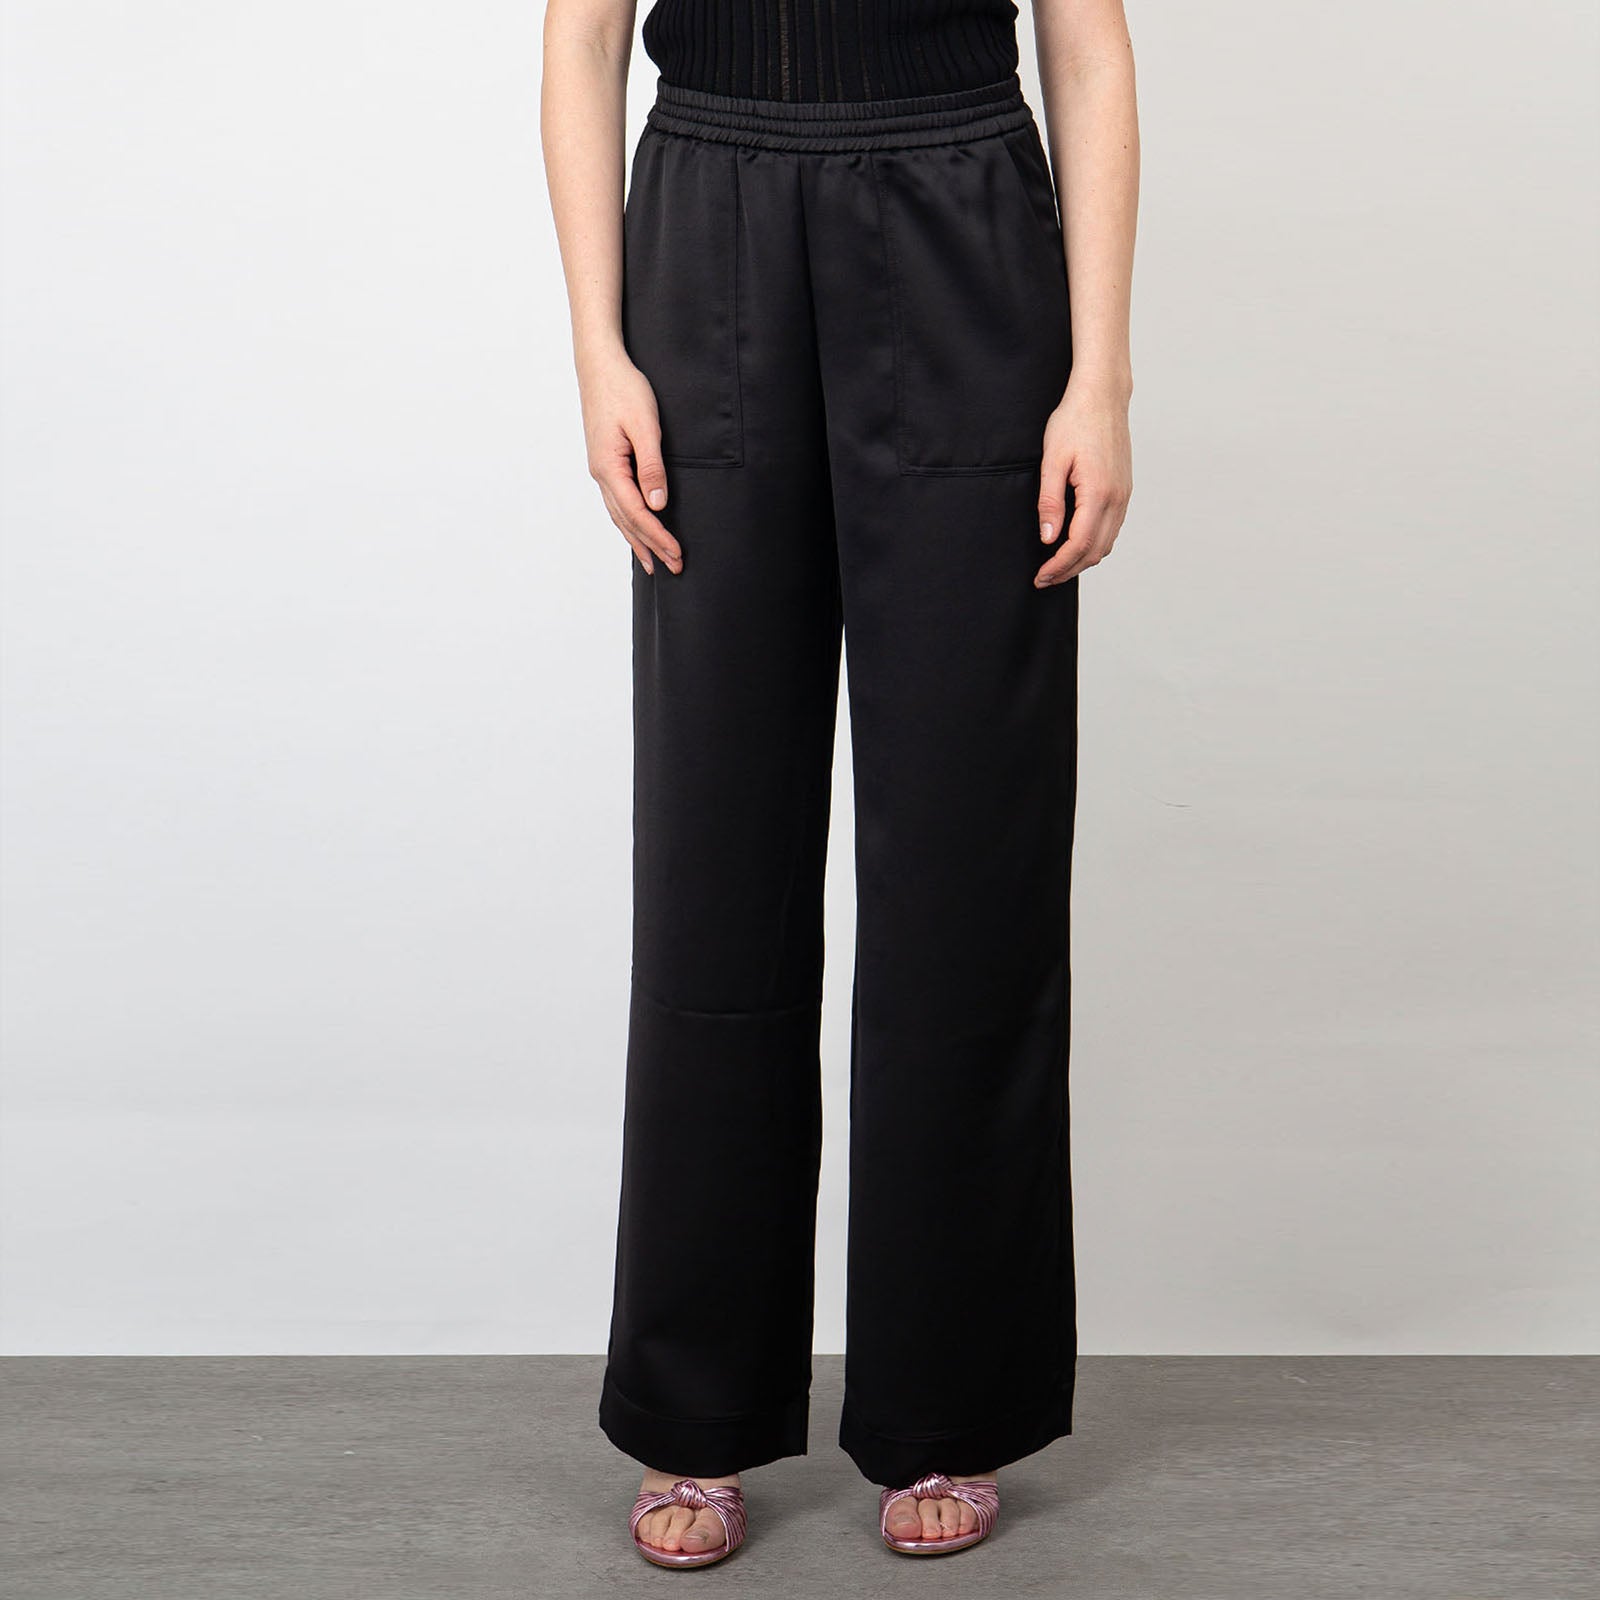 Roberto Collina Soft Satin Black Synthetic Trousers - 7